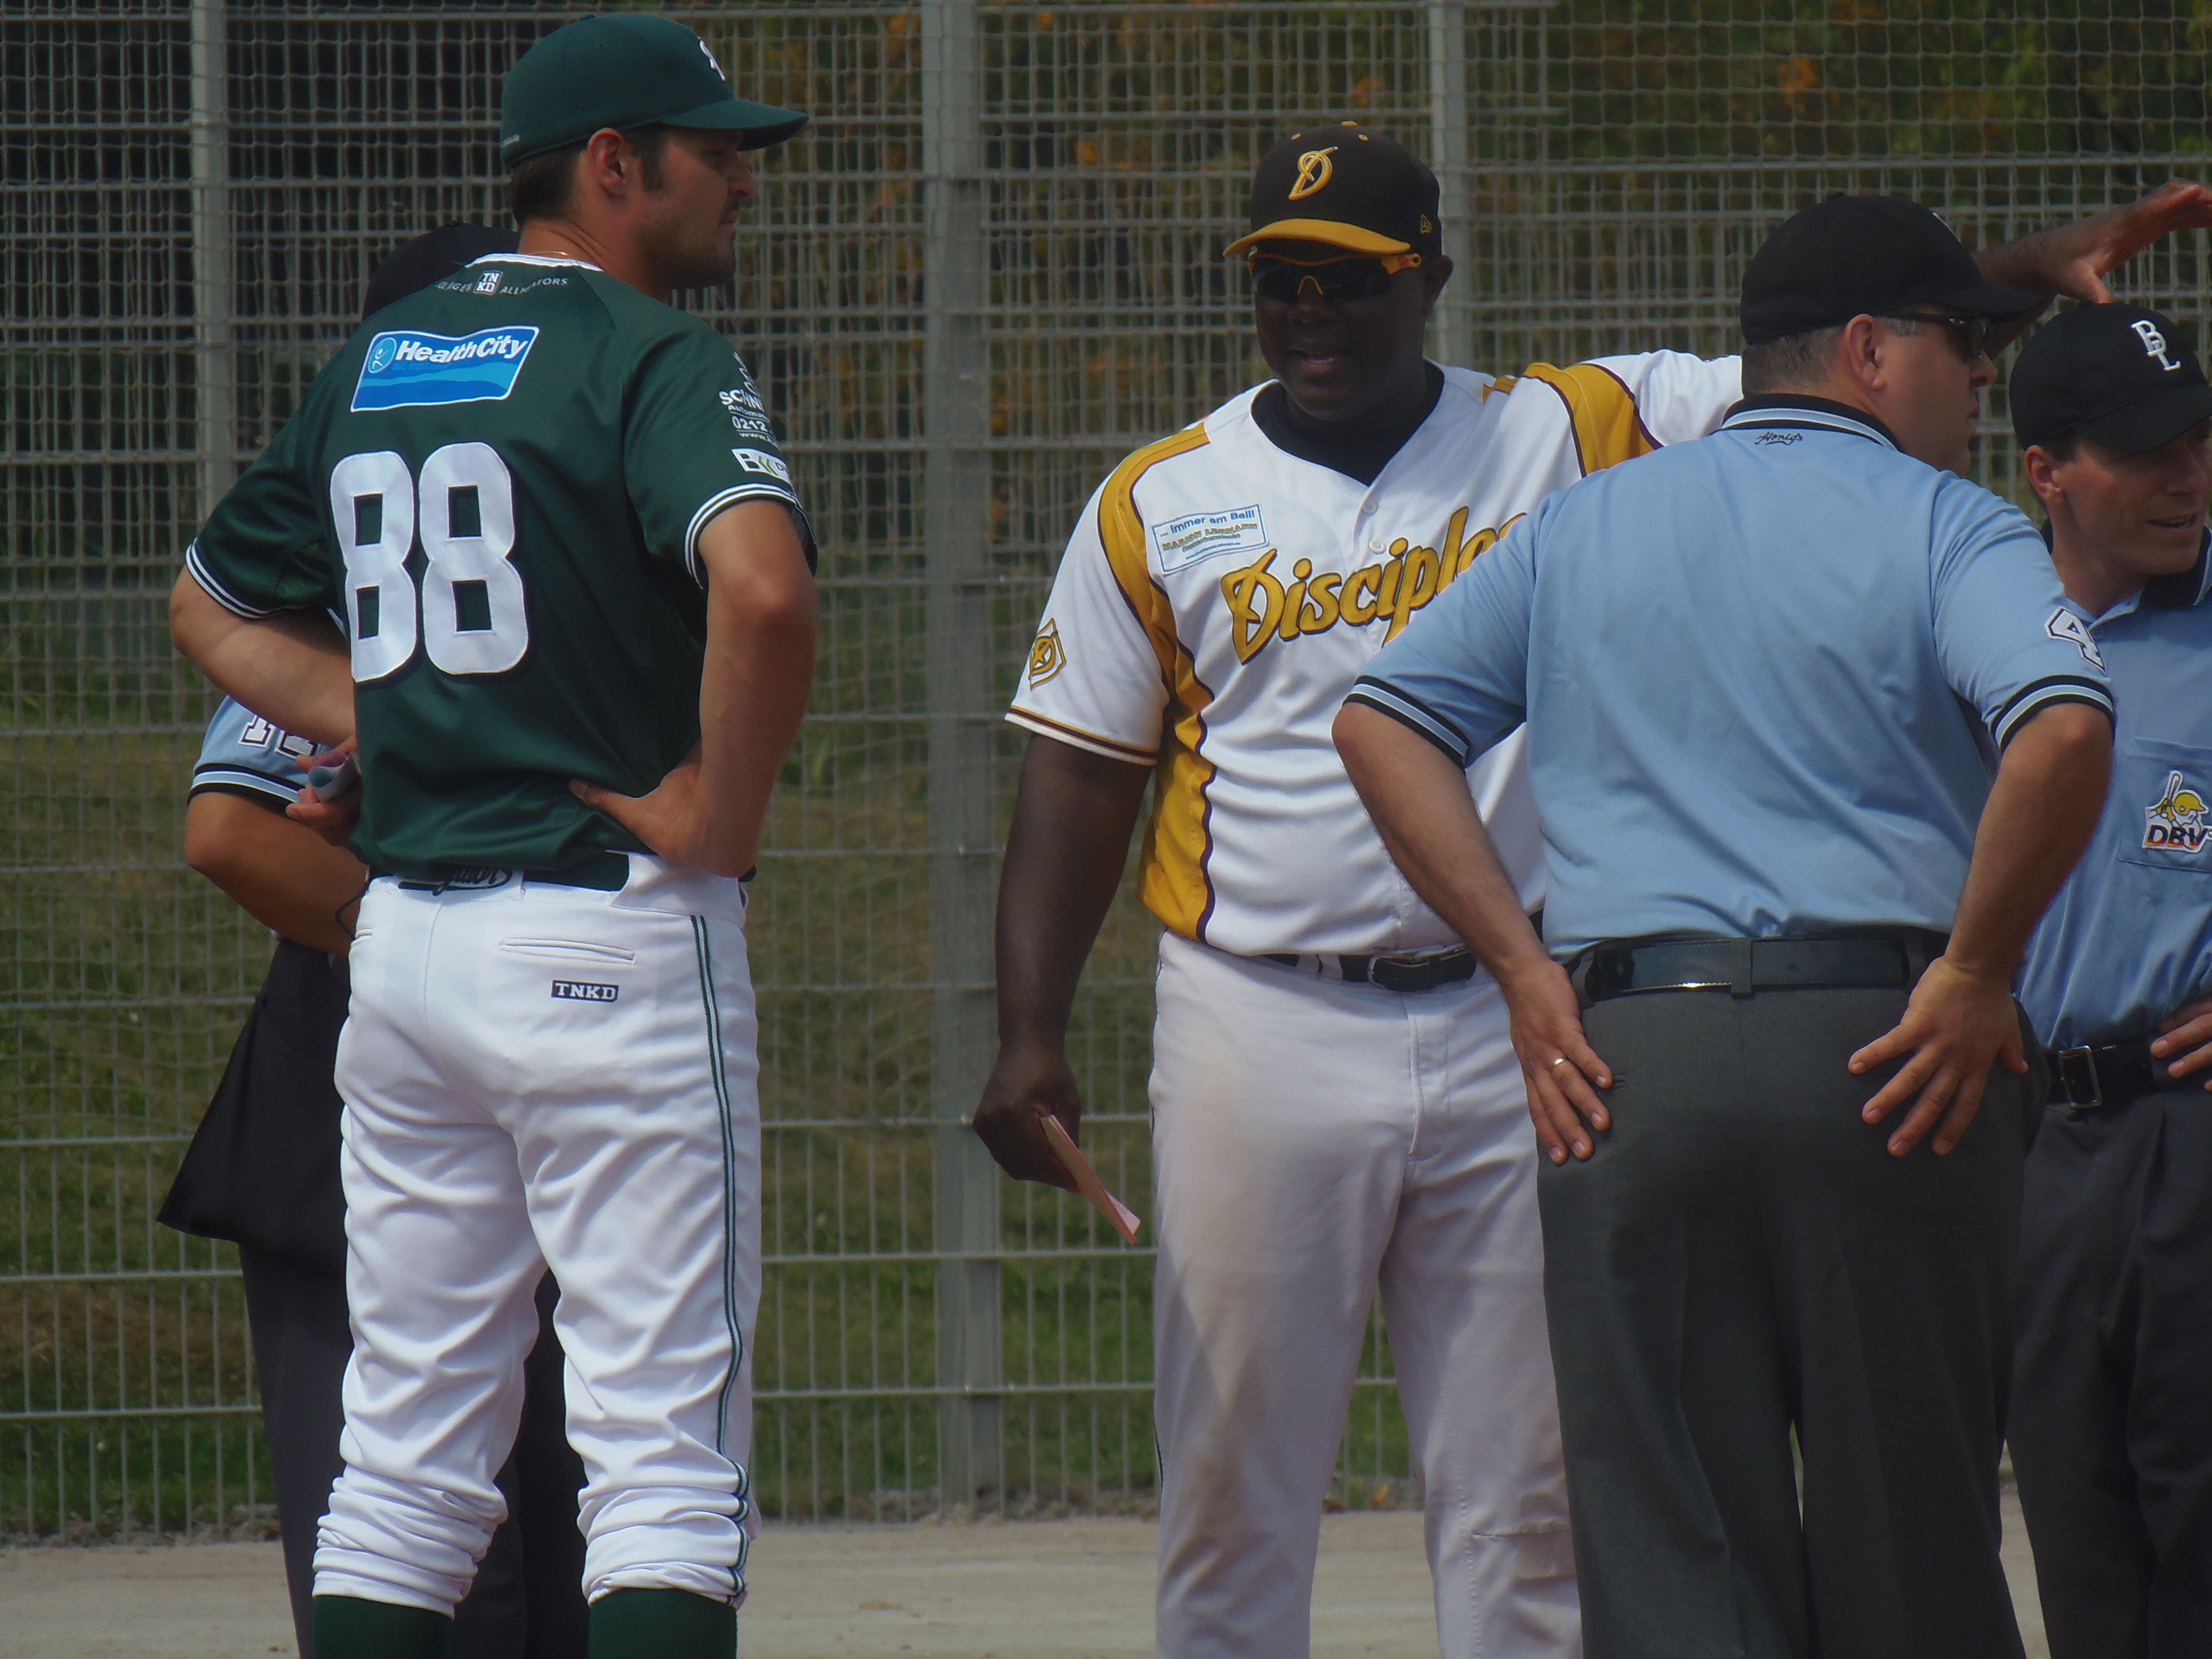 Solingen Alligators coach Norman Eberhardt (Nr. 88) confers with umpires and Haar Dicsiples head coach Keith Maxwell to exchange line-up cards and discuss ground rules before the two teams' playoff action.
Photo: Douglas Sutton